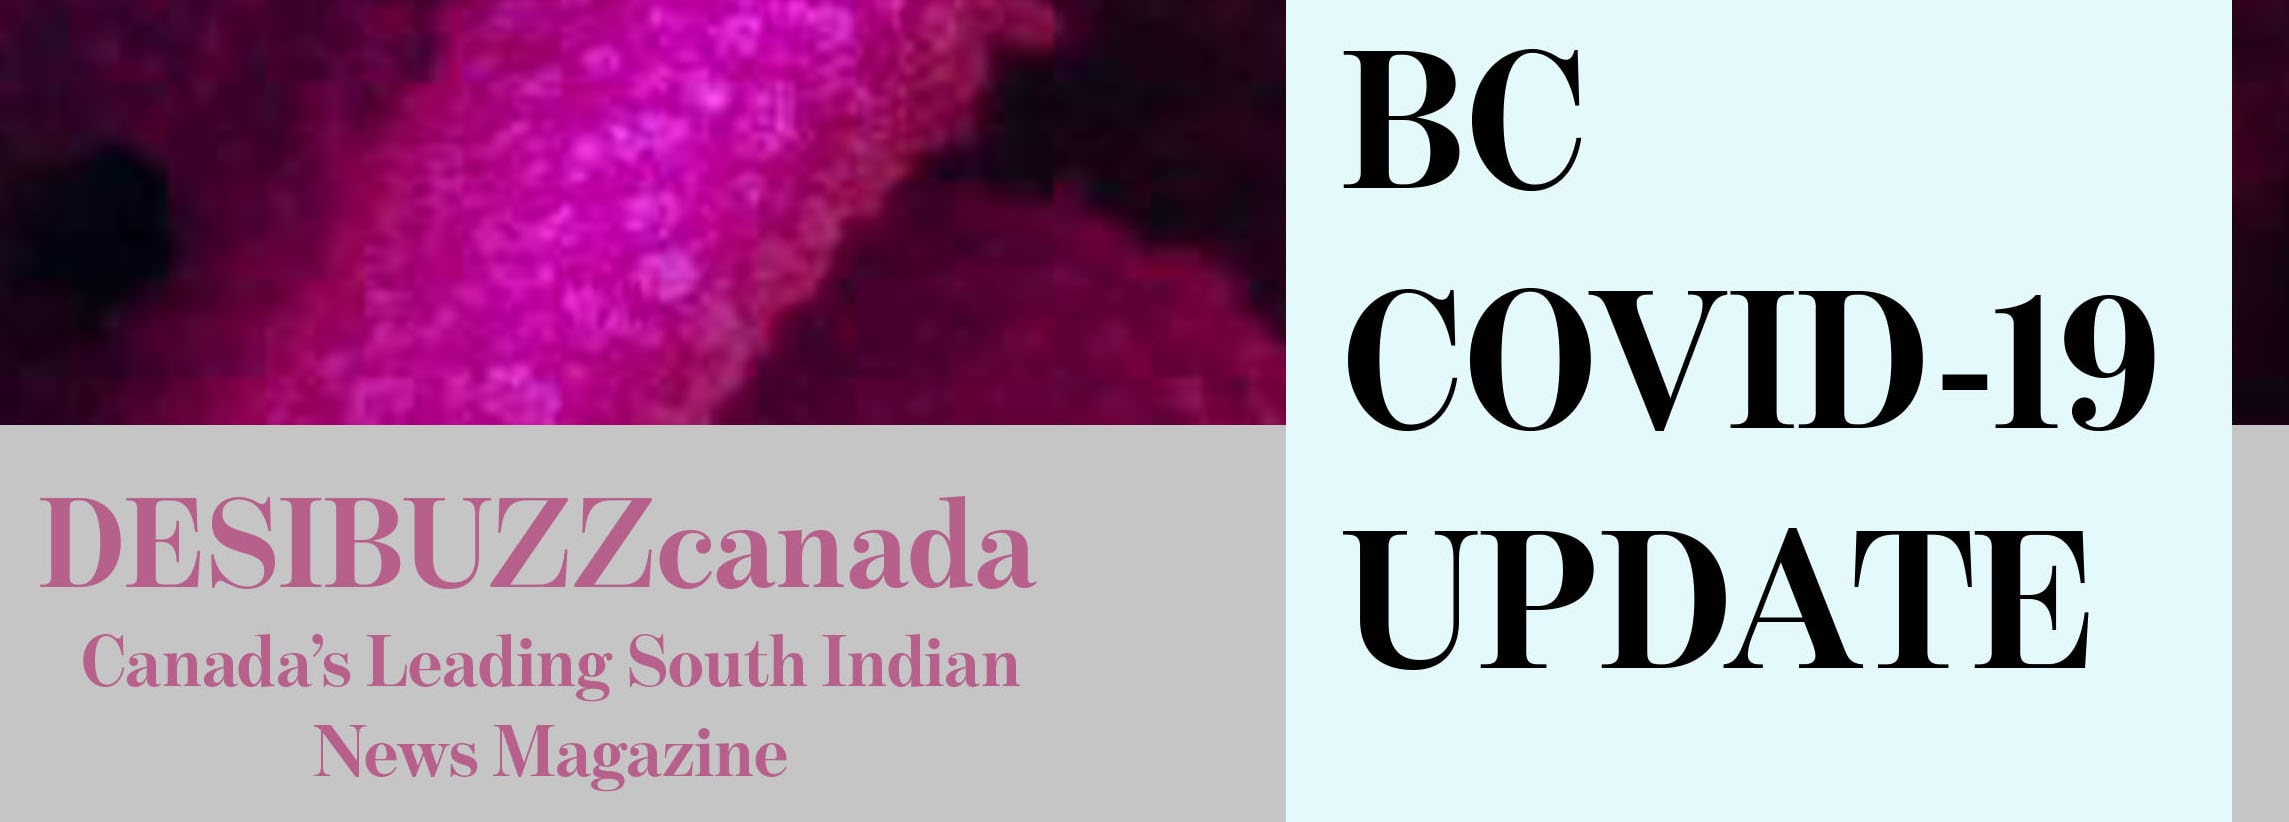 BC COVID-19 DAILY UPDATE: Cases Trend Down For Last Two Days With Two New Deaths